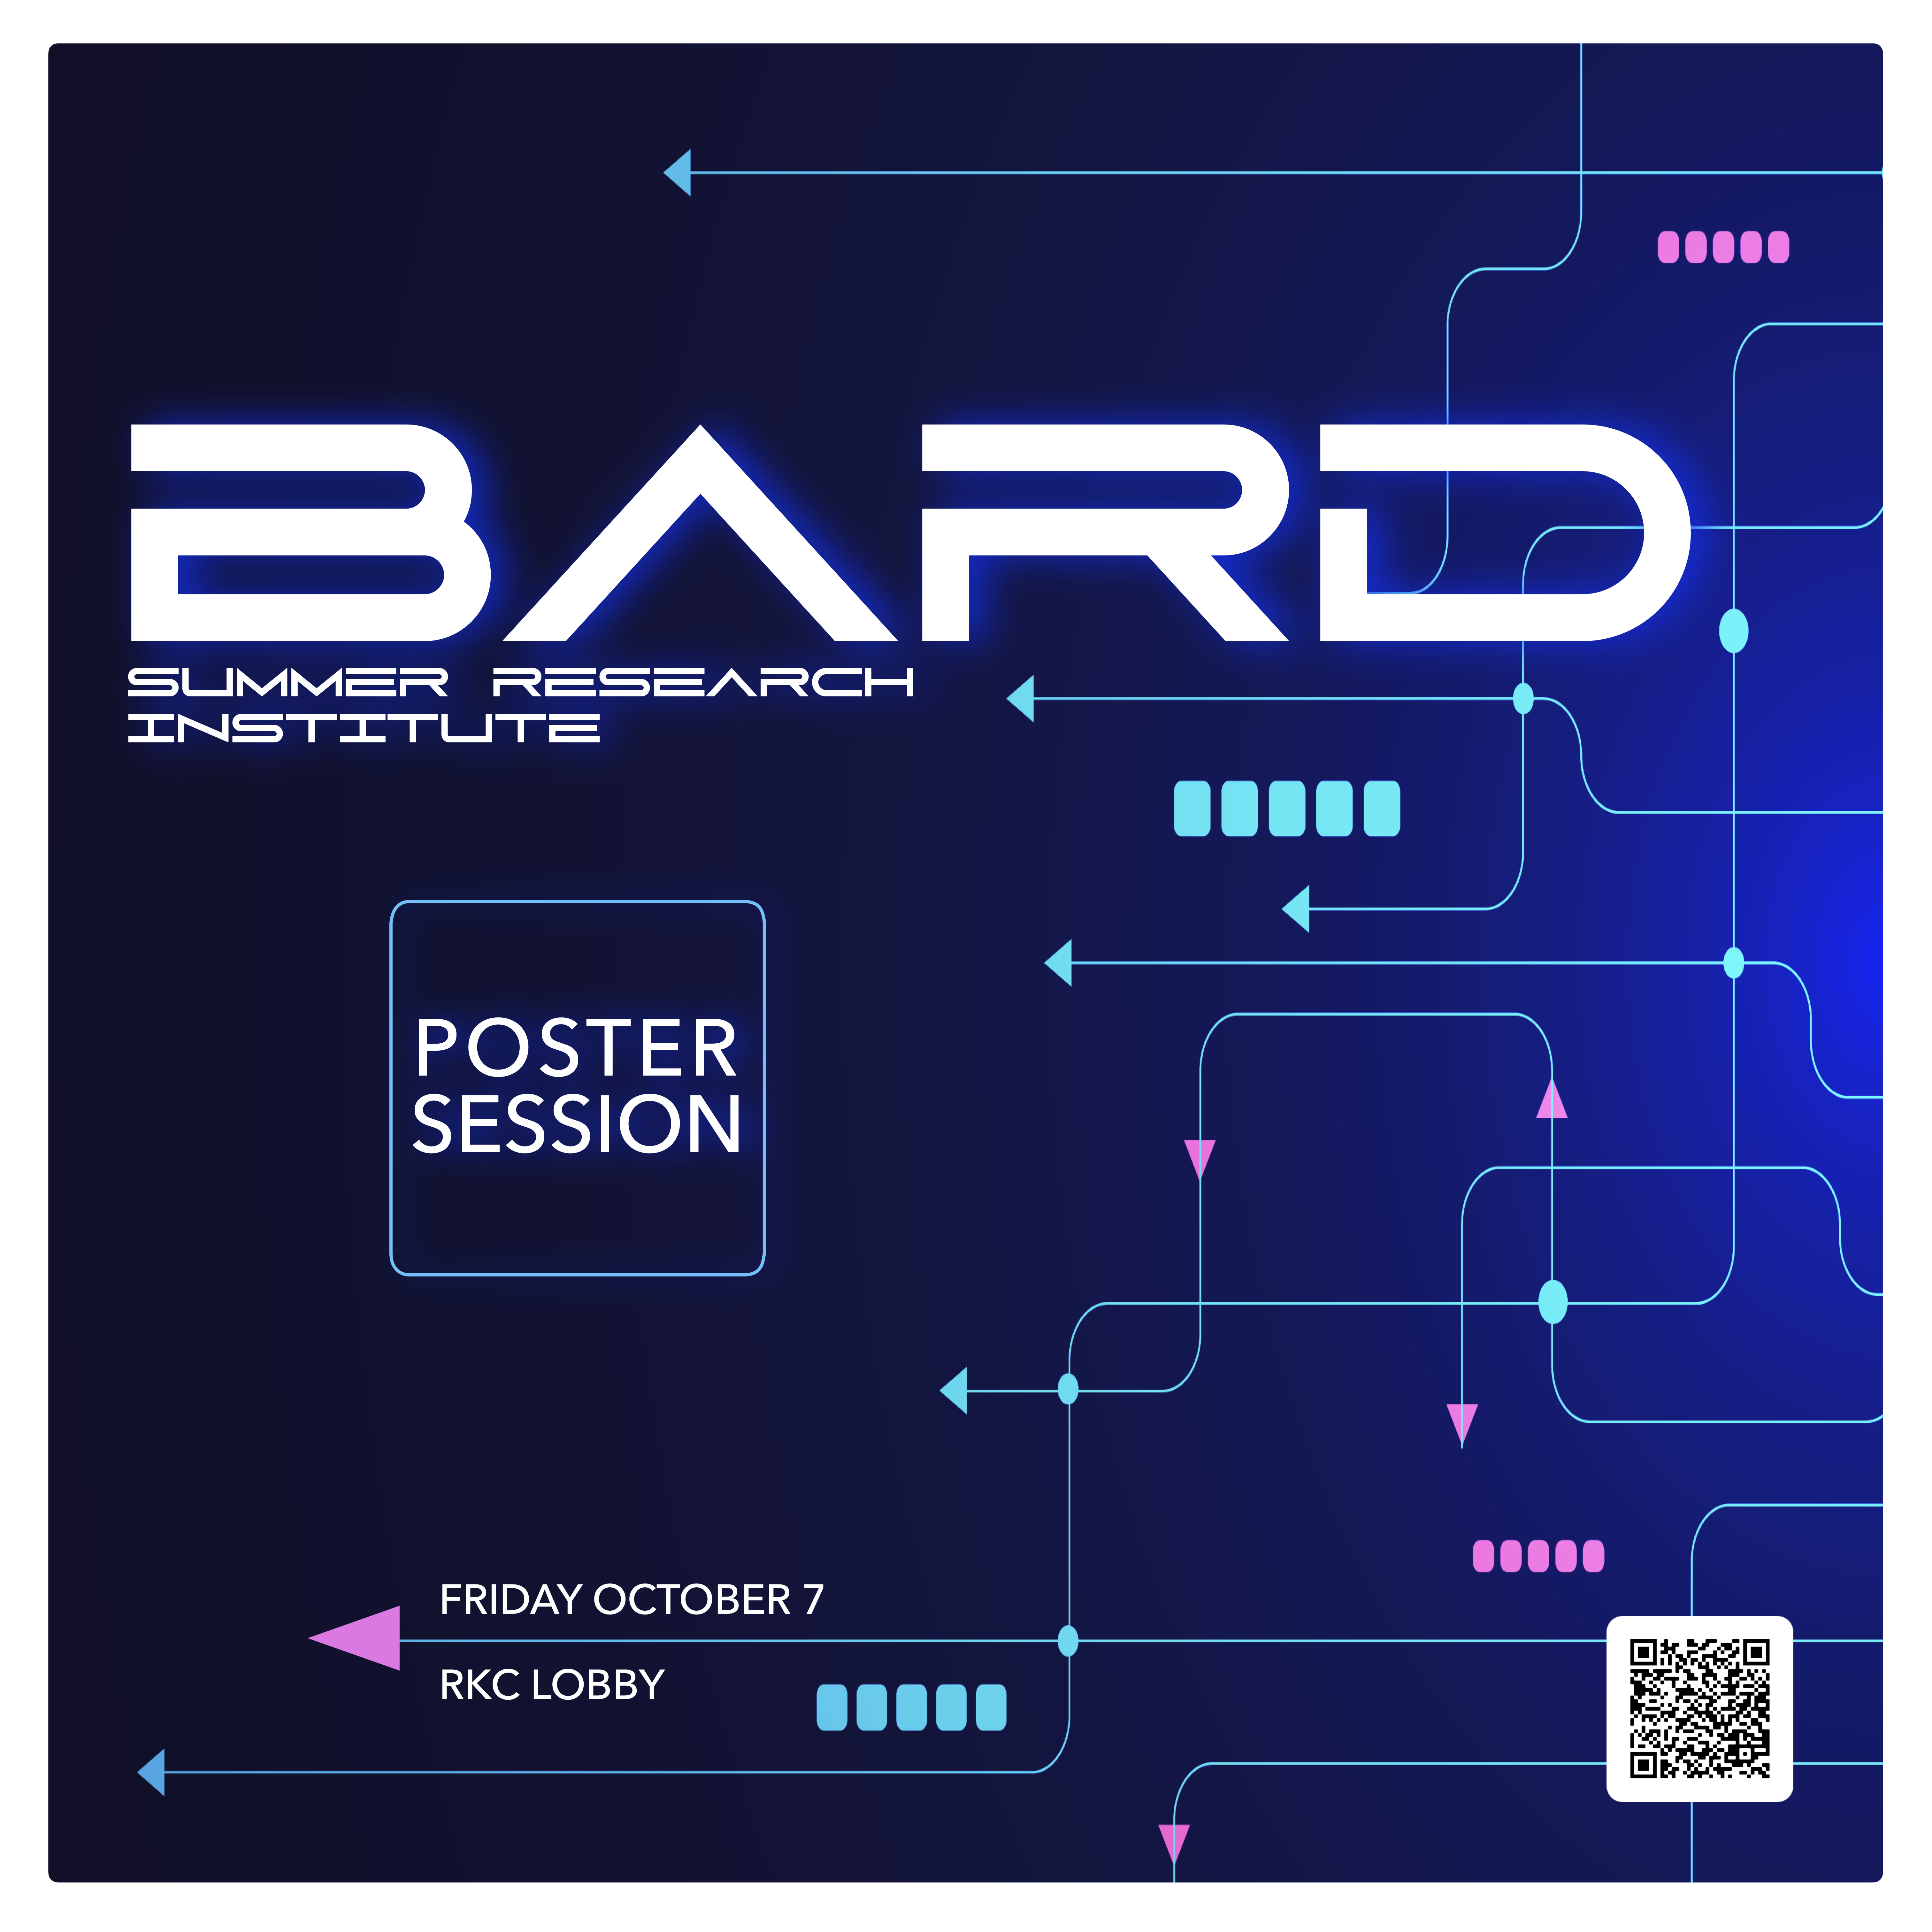 Bard Summer Research Institute Poster Session